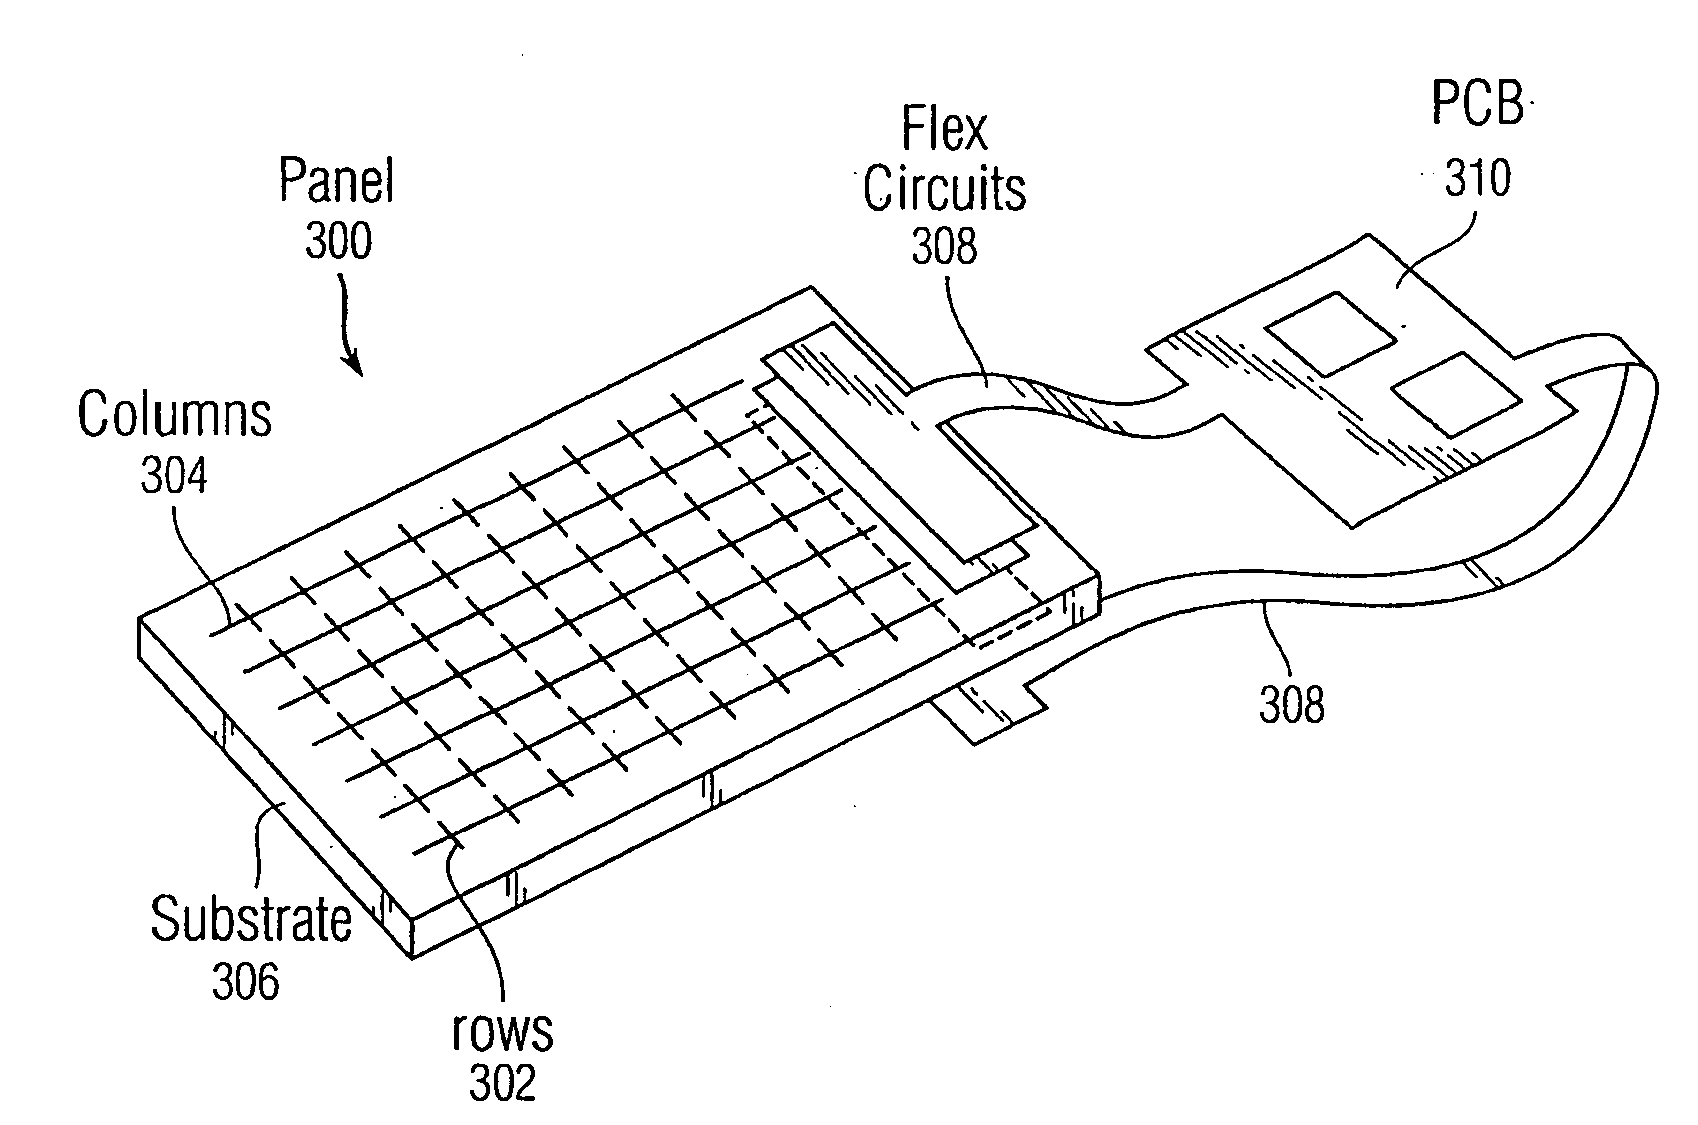 Double-sided touch sensitive panel and flex circuit bonding